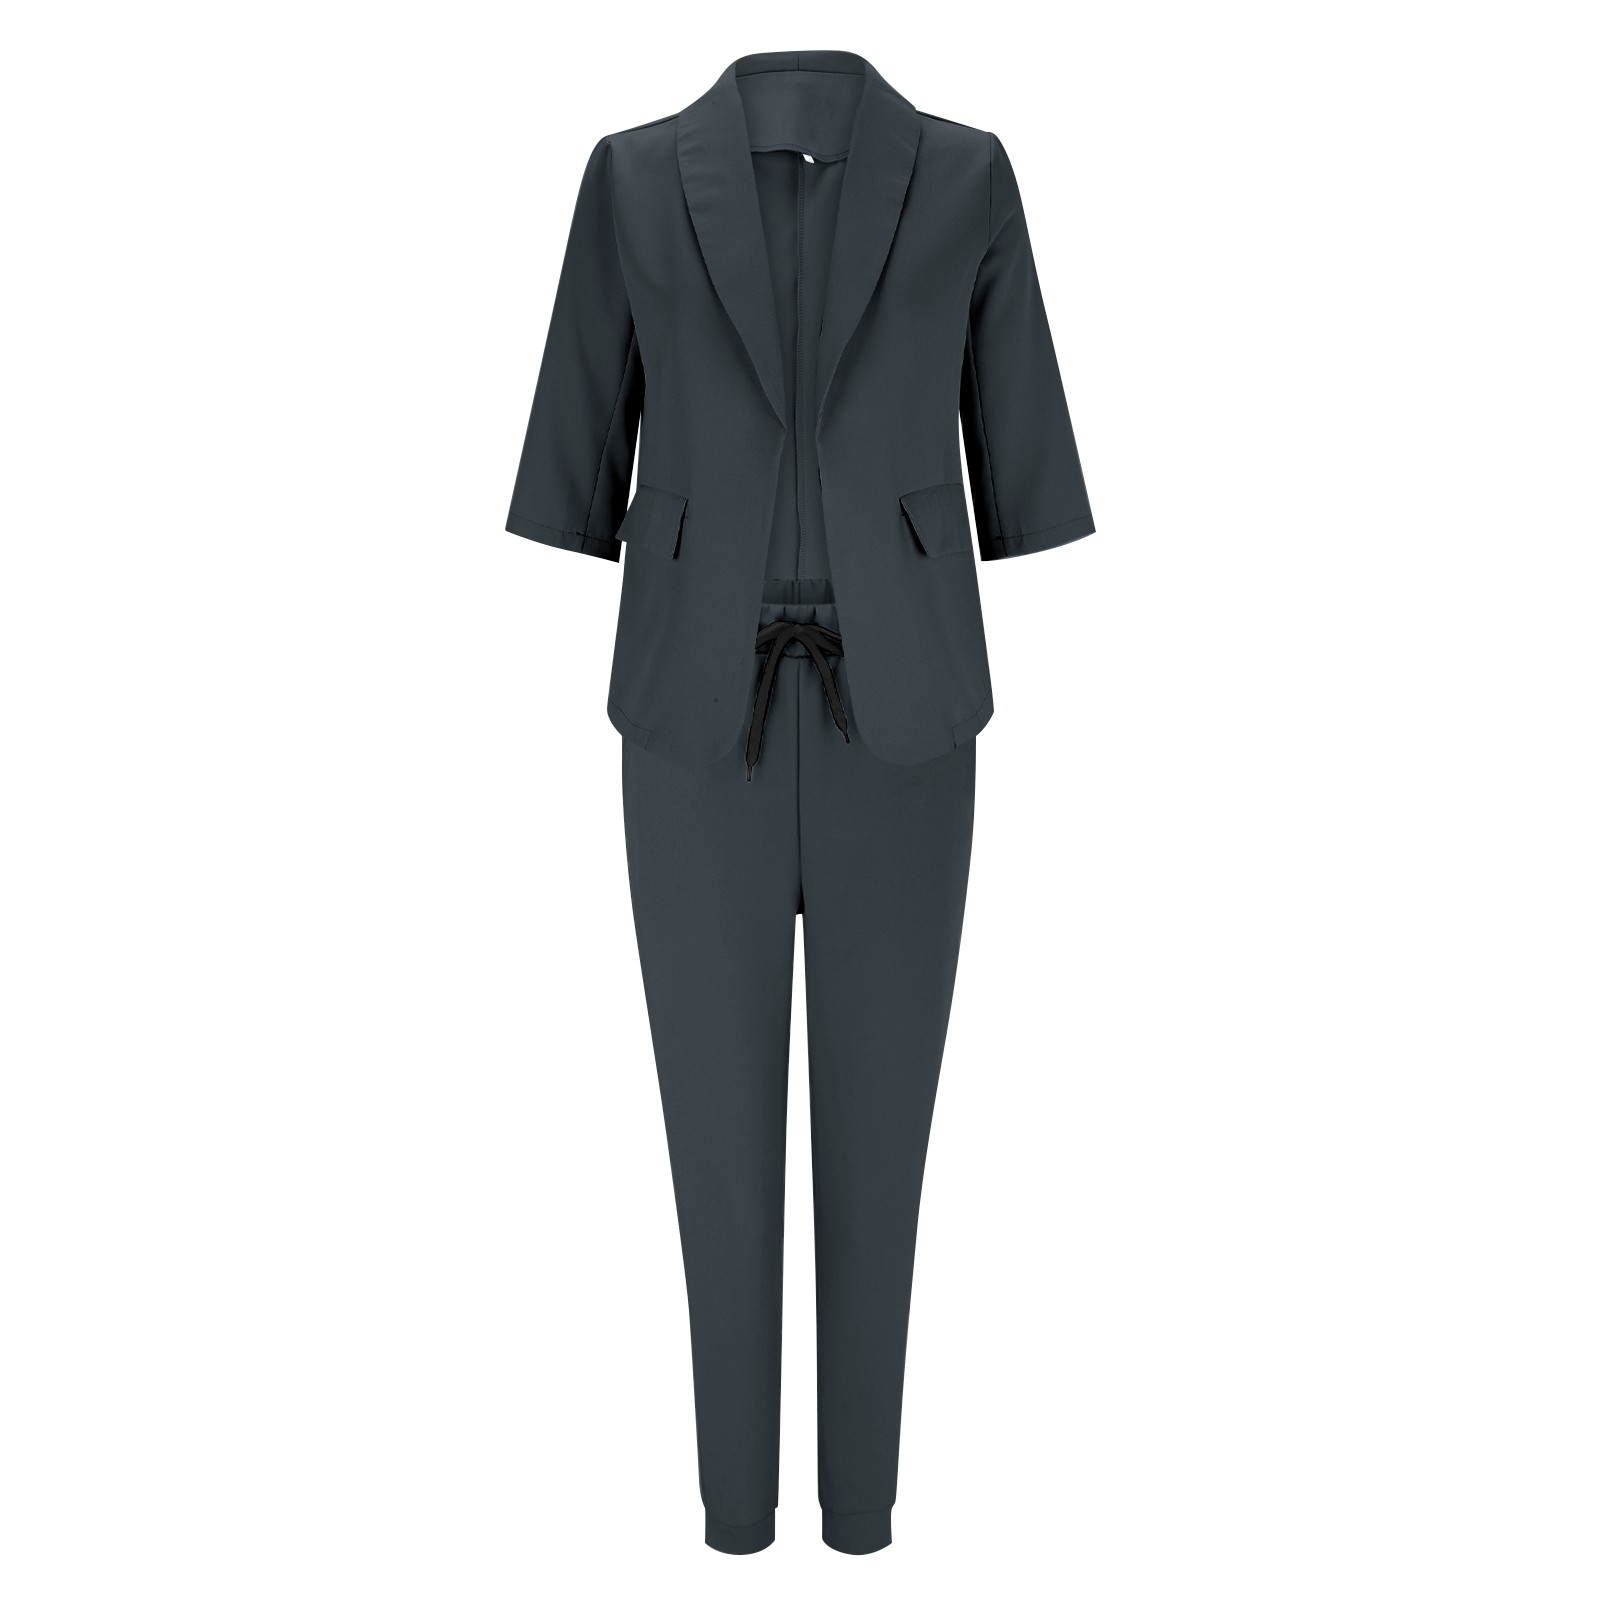 ILJNDTGBE Womens 2 Piece Outfit Open Front Blazer and Pencil Pant Women ...